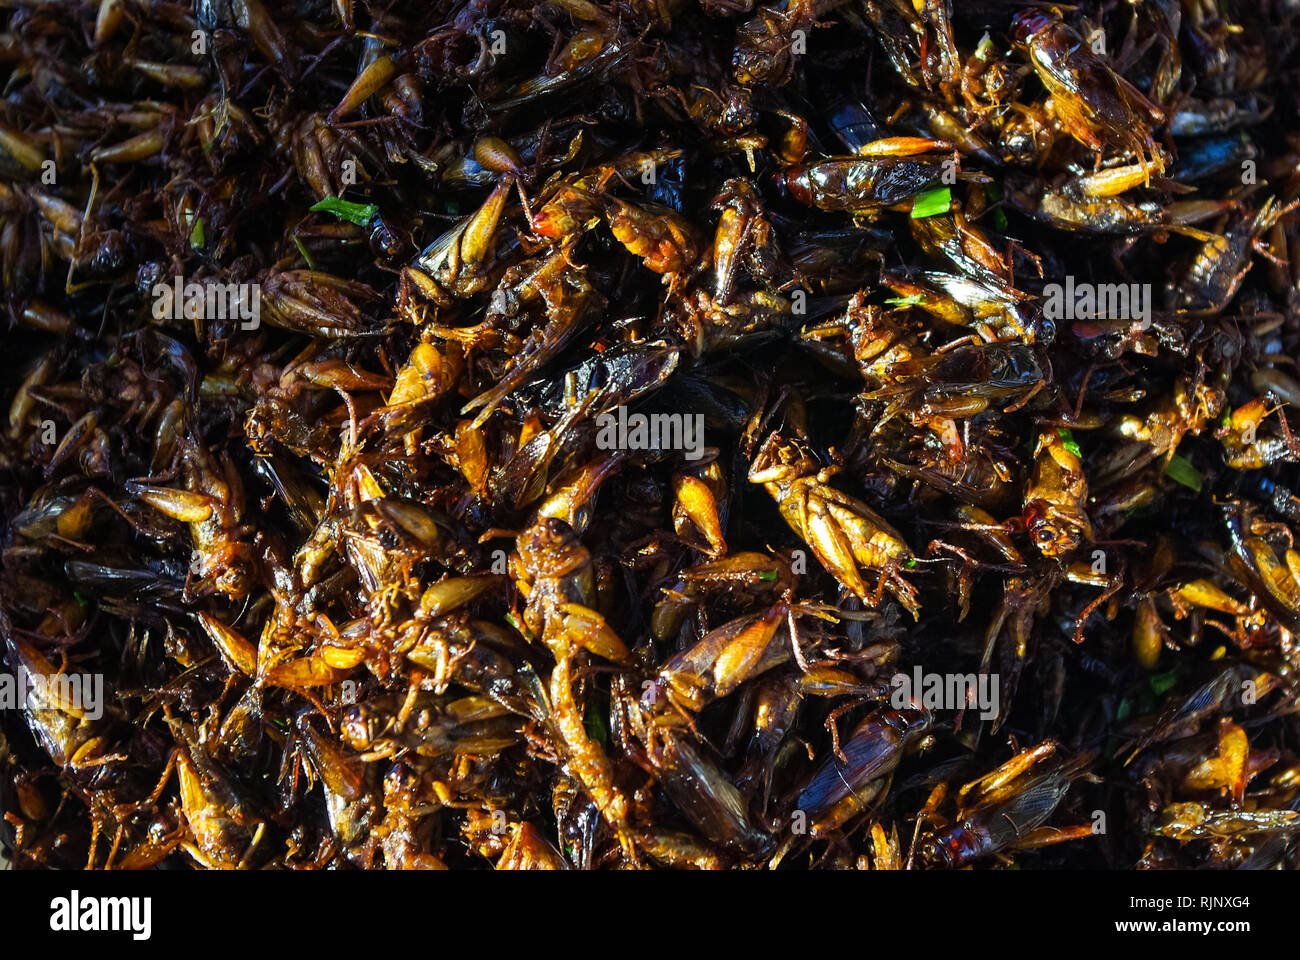 Dried grasshoppers Delicious food in Thailand. Selling dried orthoptera grasshoppers and locusts. Stock Photo